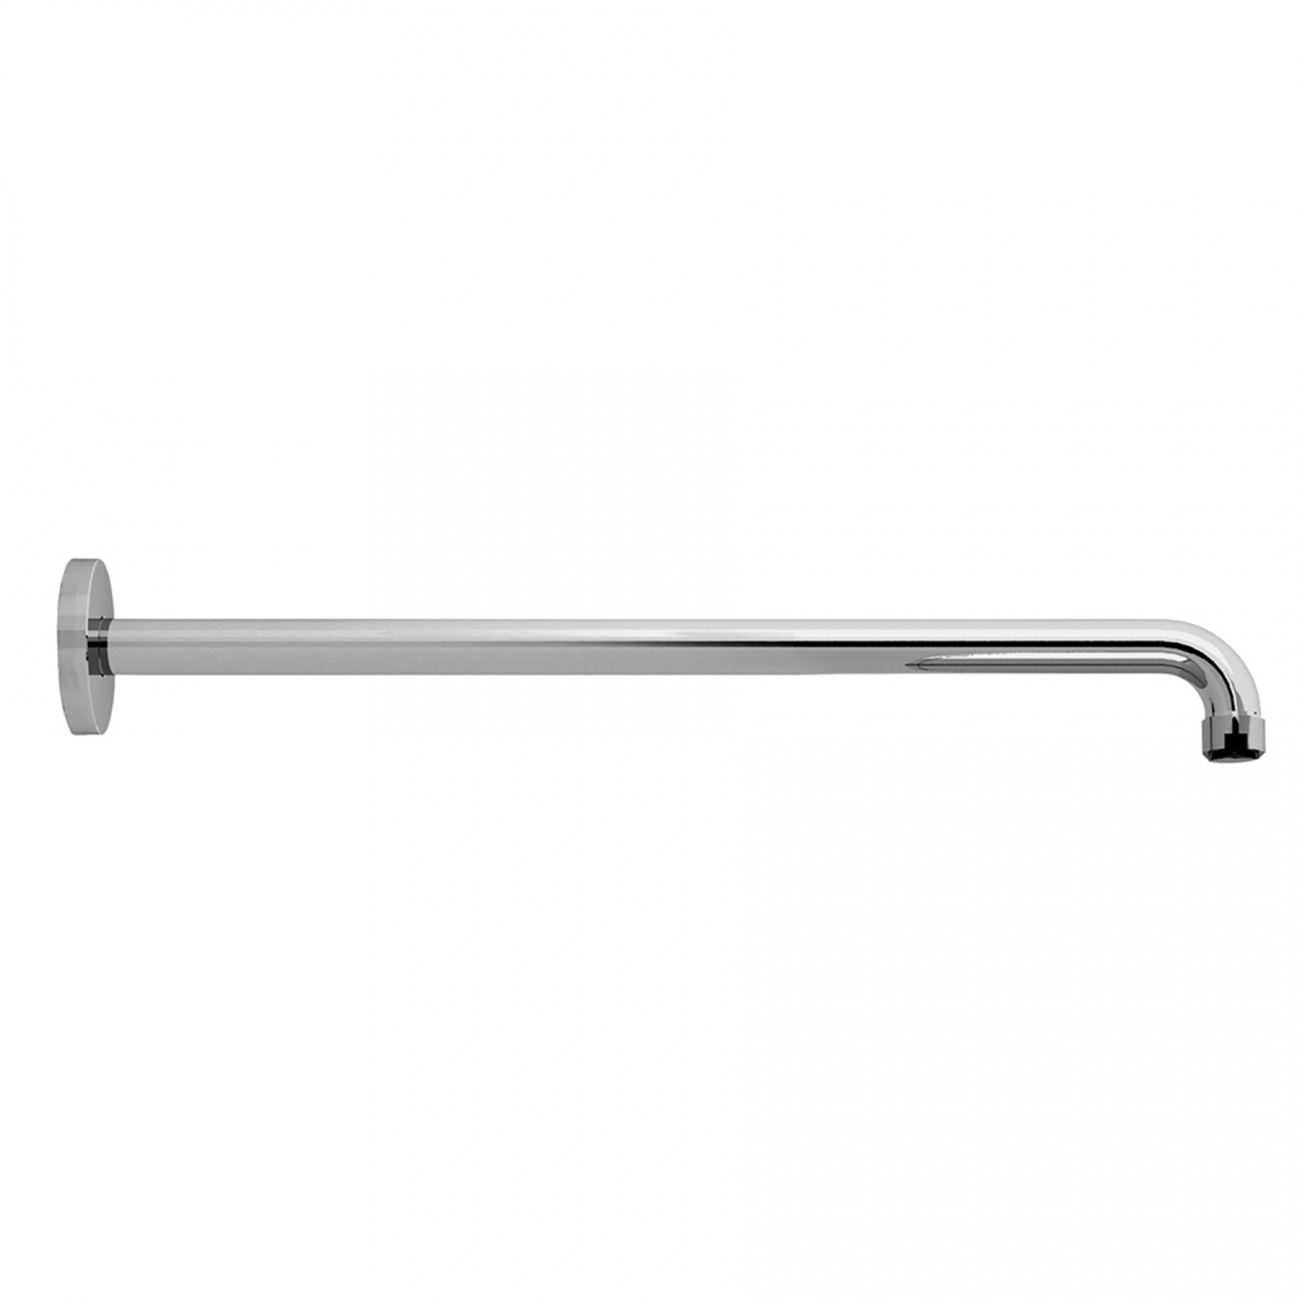 Fantini Aboutwater AA/27 shower arm